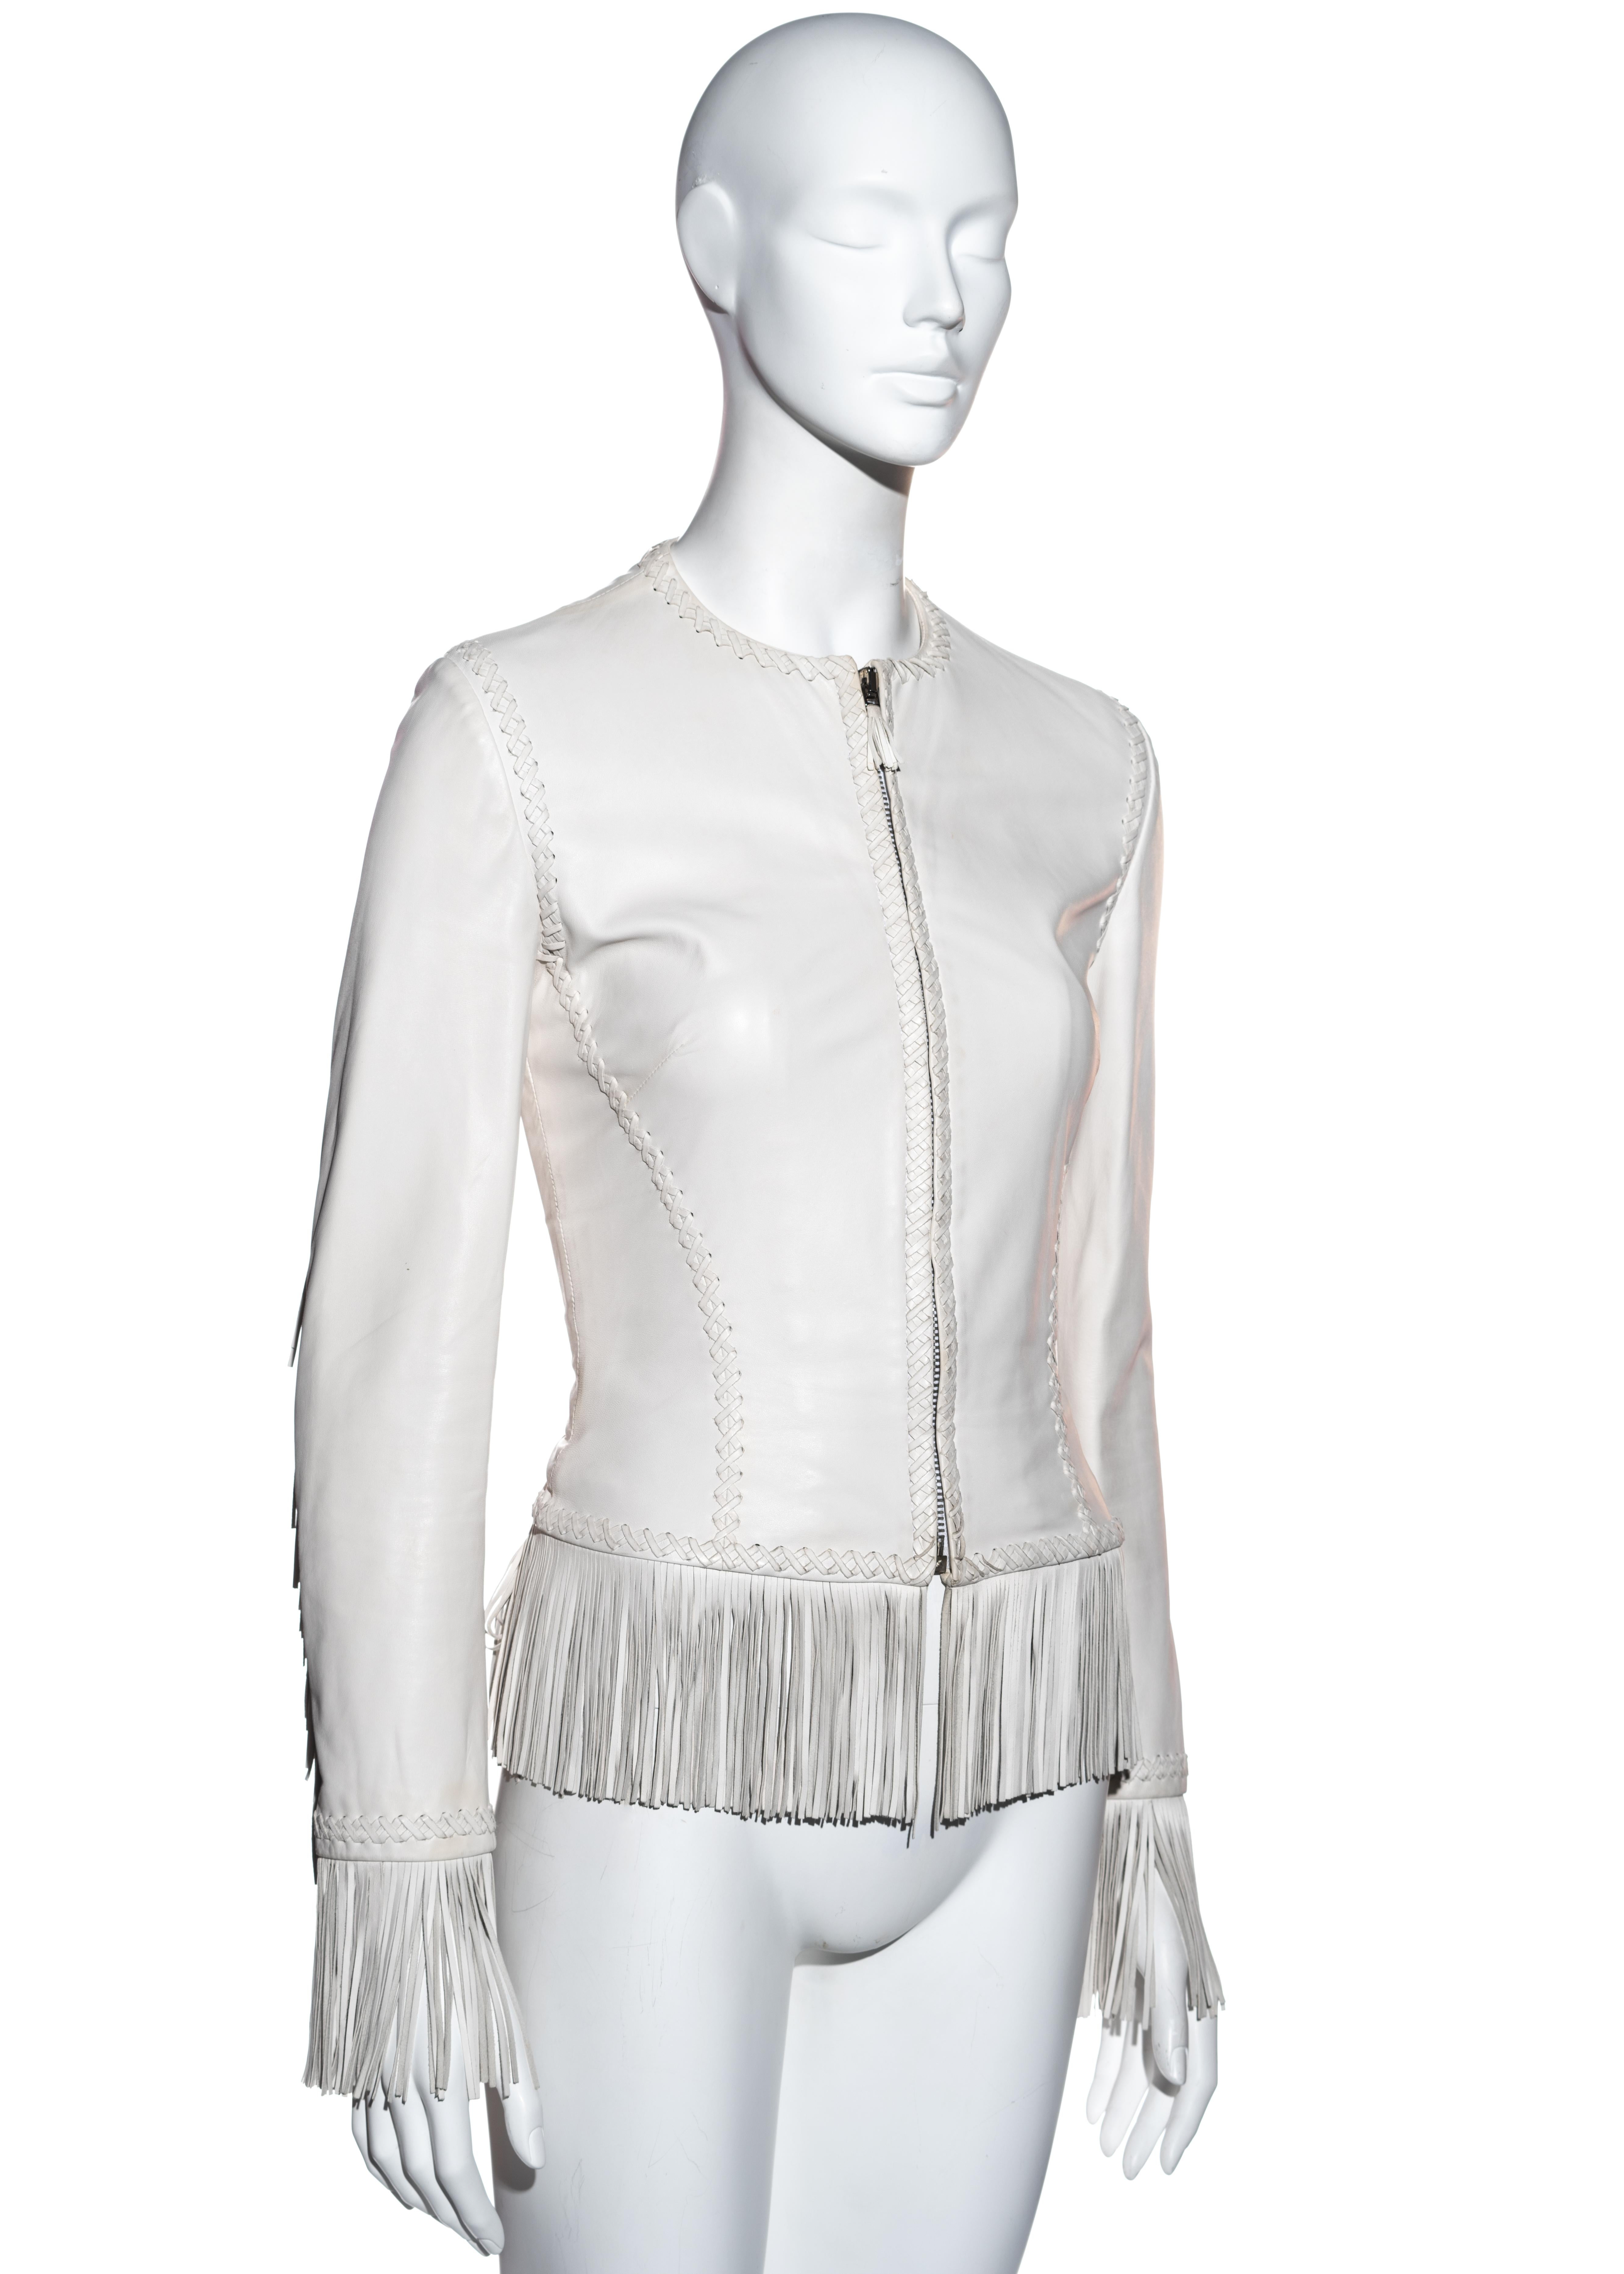 Gray Gianni Versace white leather backless lace up fringed jacket, ss 2002